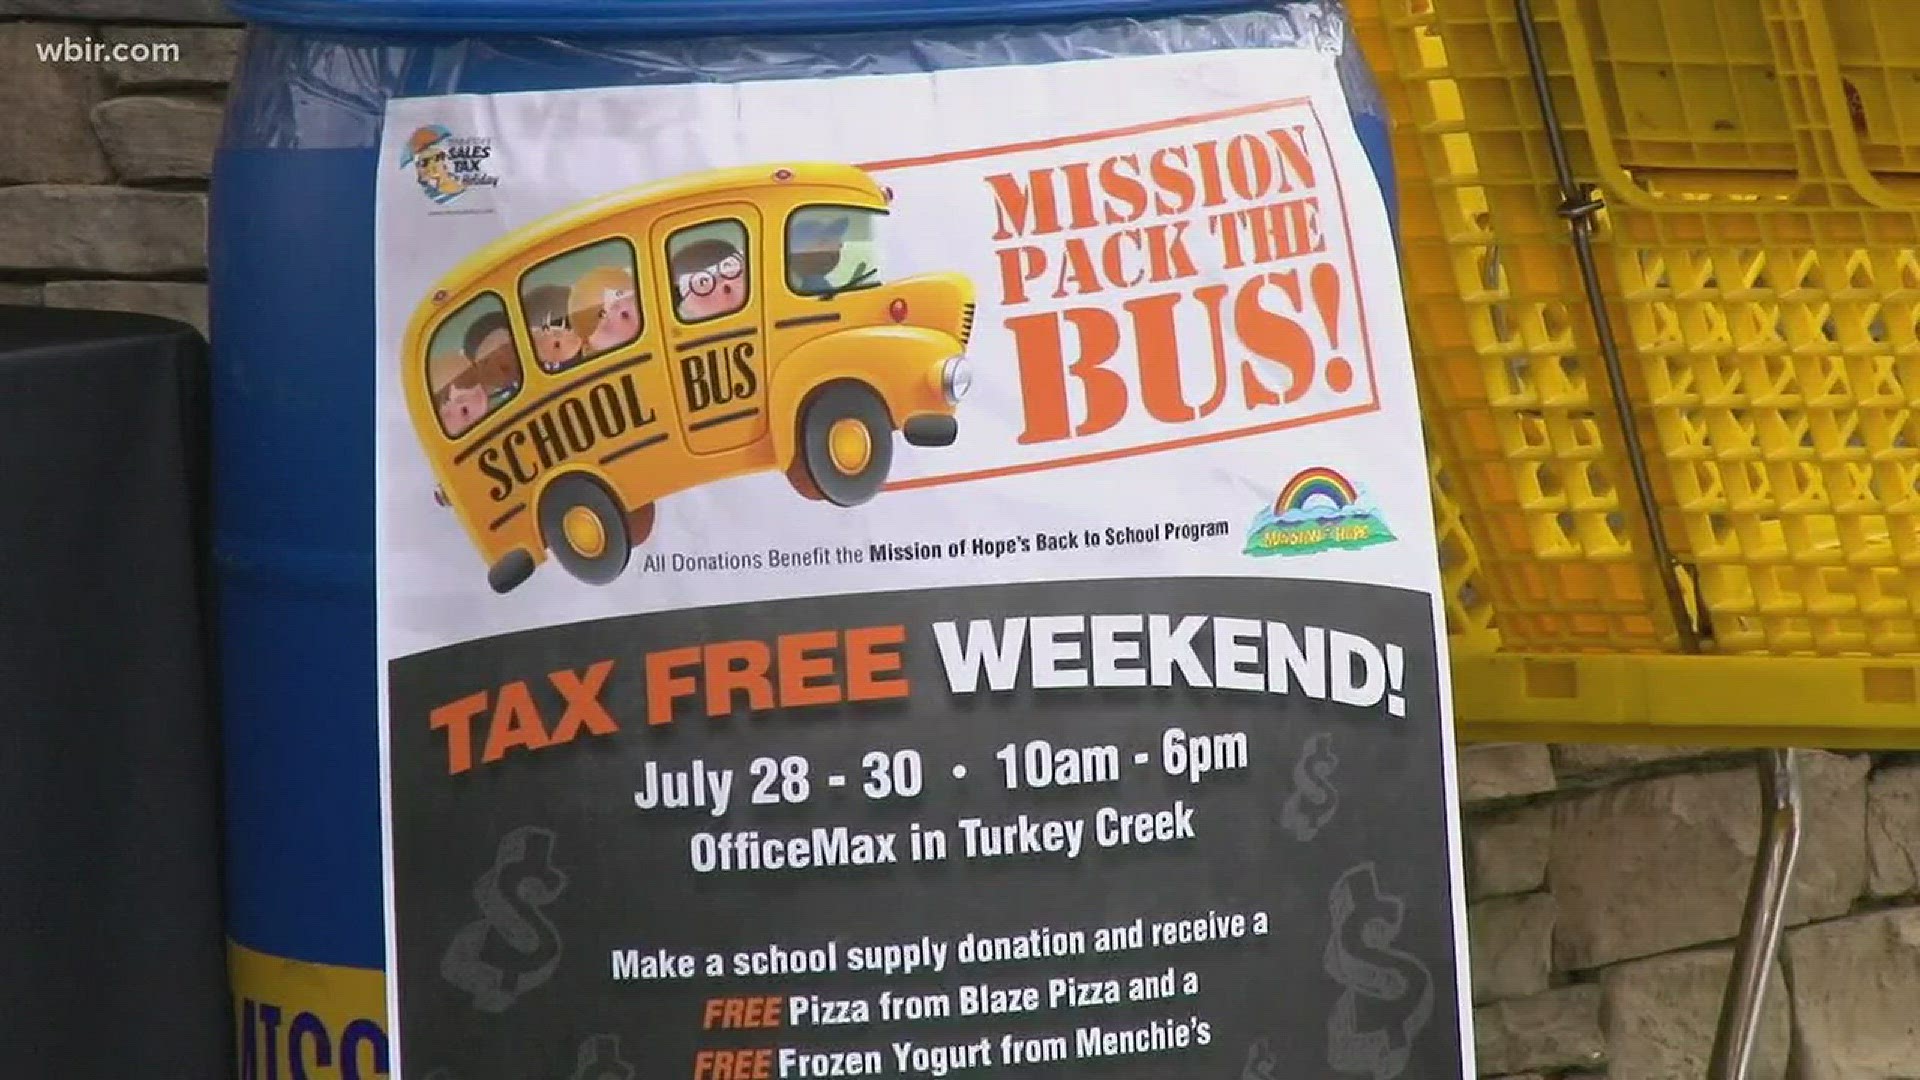 Pack the Bus 2018 to benefit Mission of Hope runs July 27-29, 2018 from 10am to 6pm, at OfficeMax in Turkey Creek- Knoxville. They are collecting school supplies all weekend to help the Mission of Hope serve 28 elementary schools in rural Appalachia. For more information visit missionofhope.org
July 25, 2018-4pm